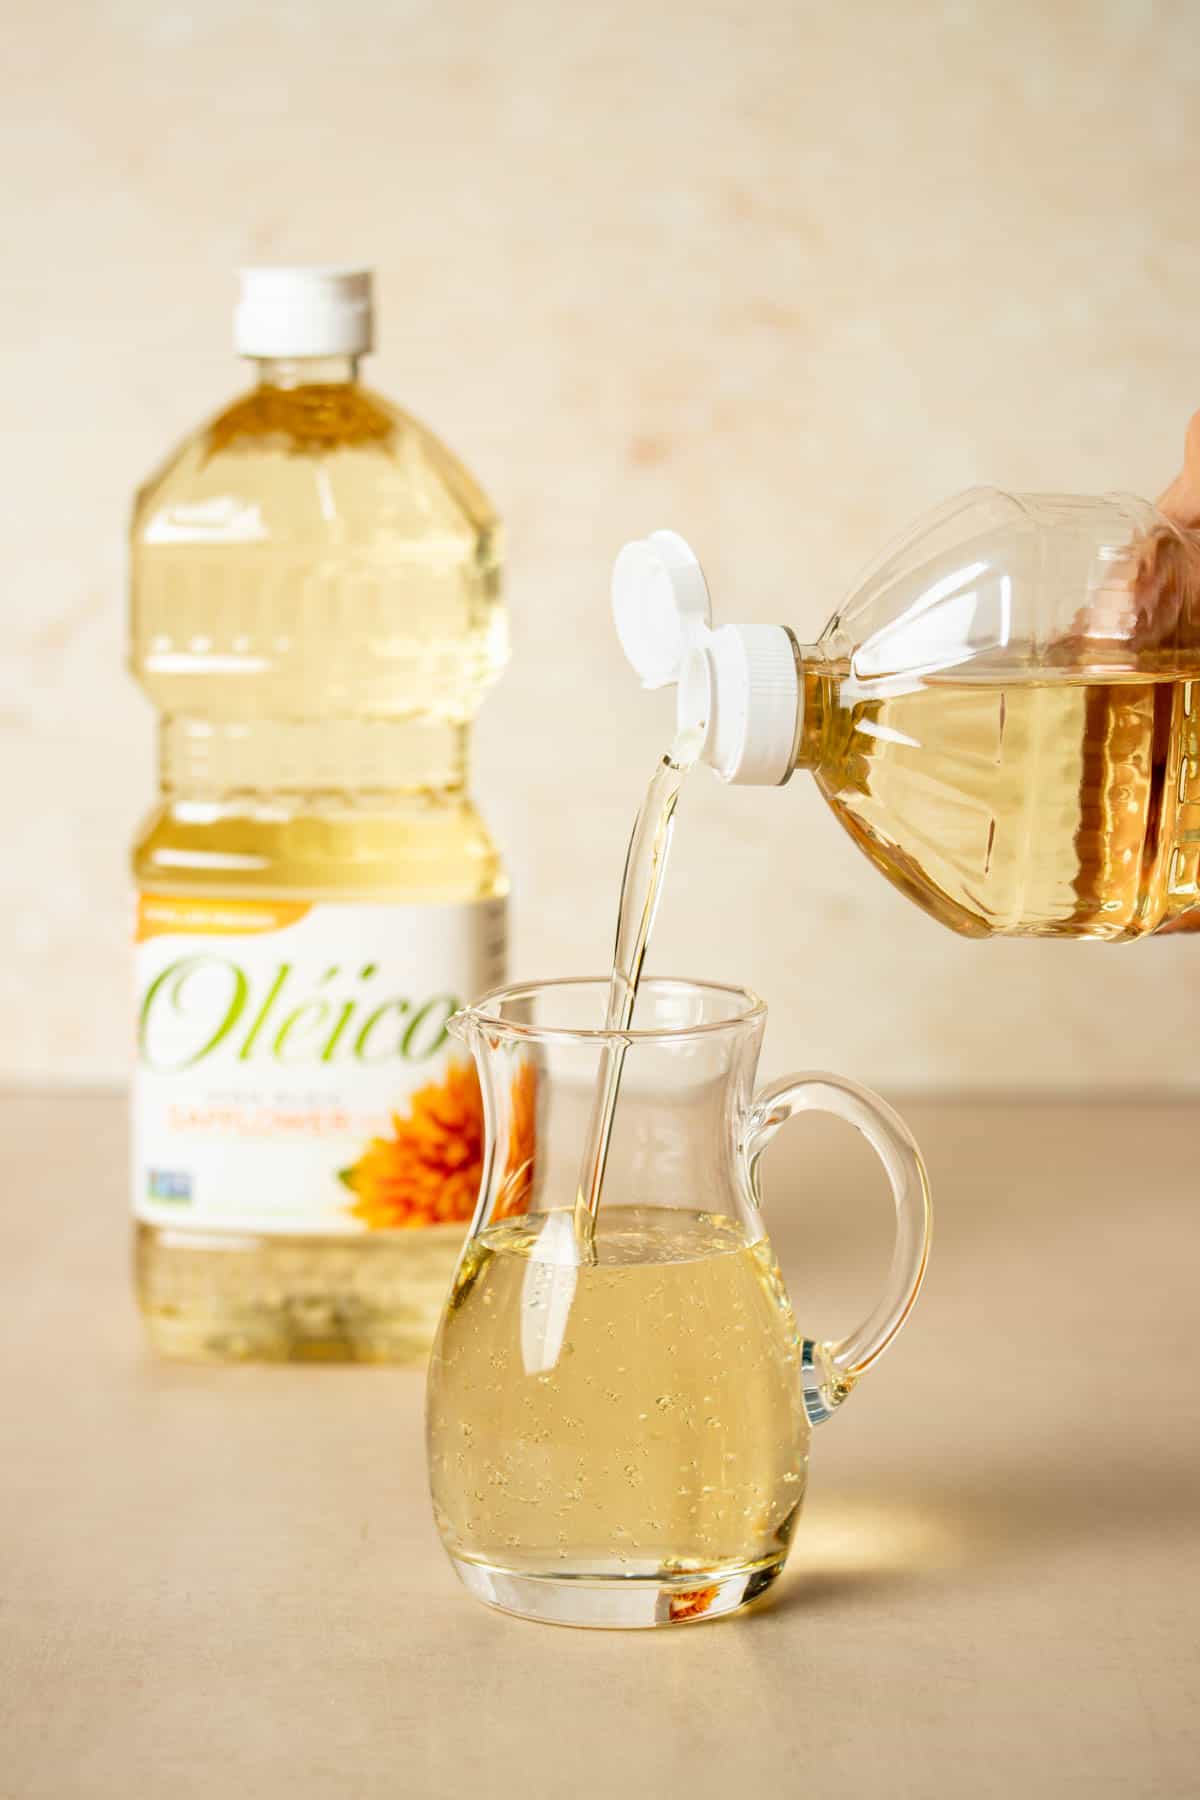 A hand pouring oil from a bottle into a small glass pitcher with another bottle of oil in the background.